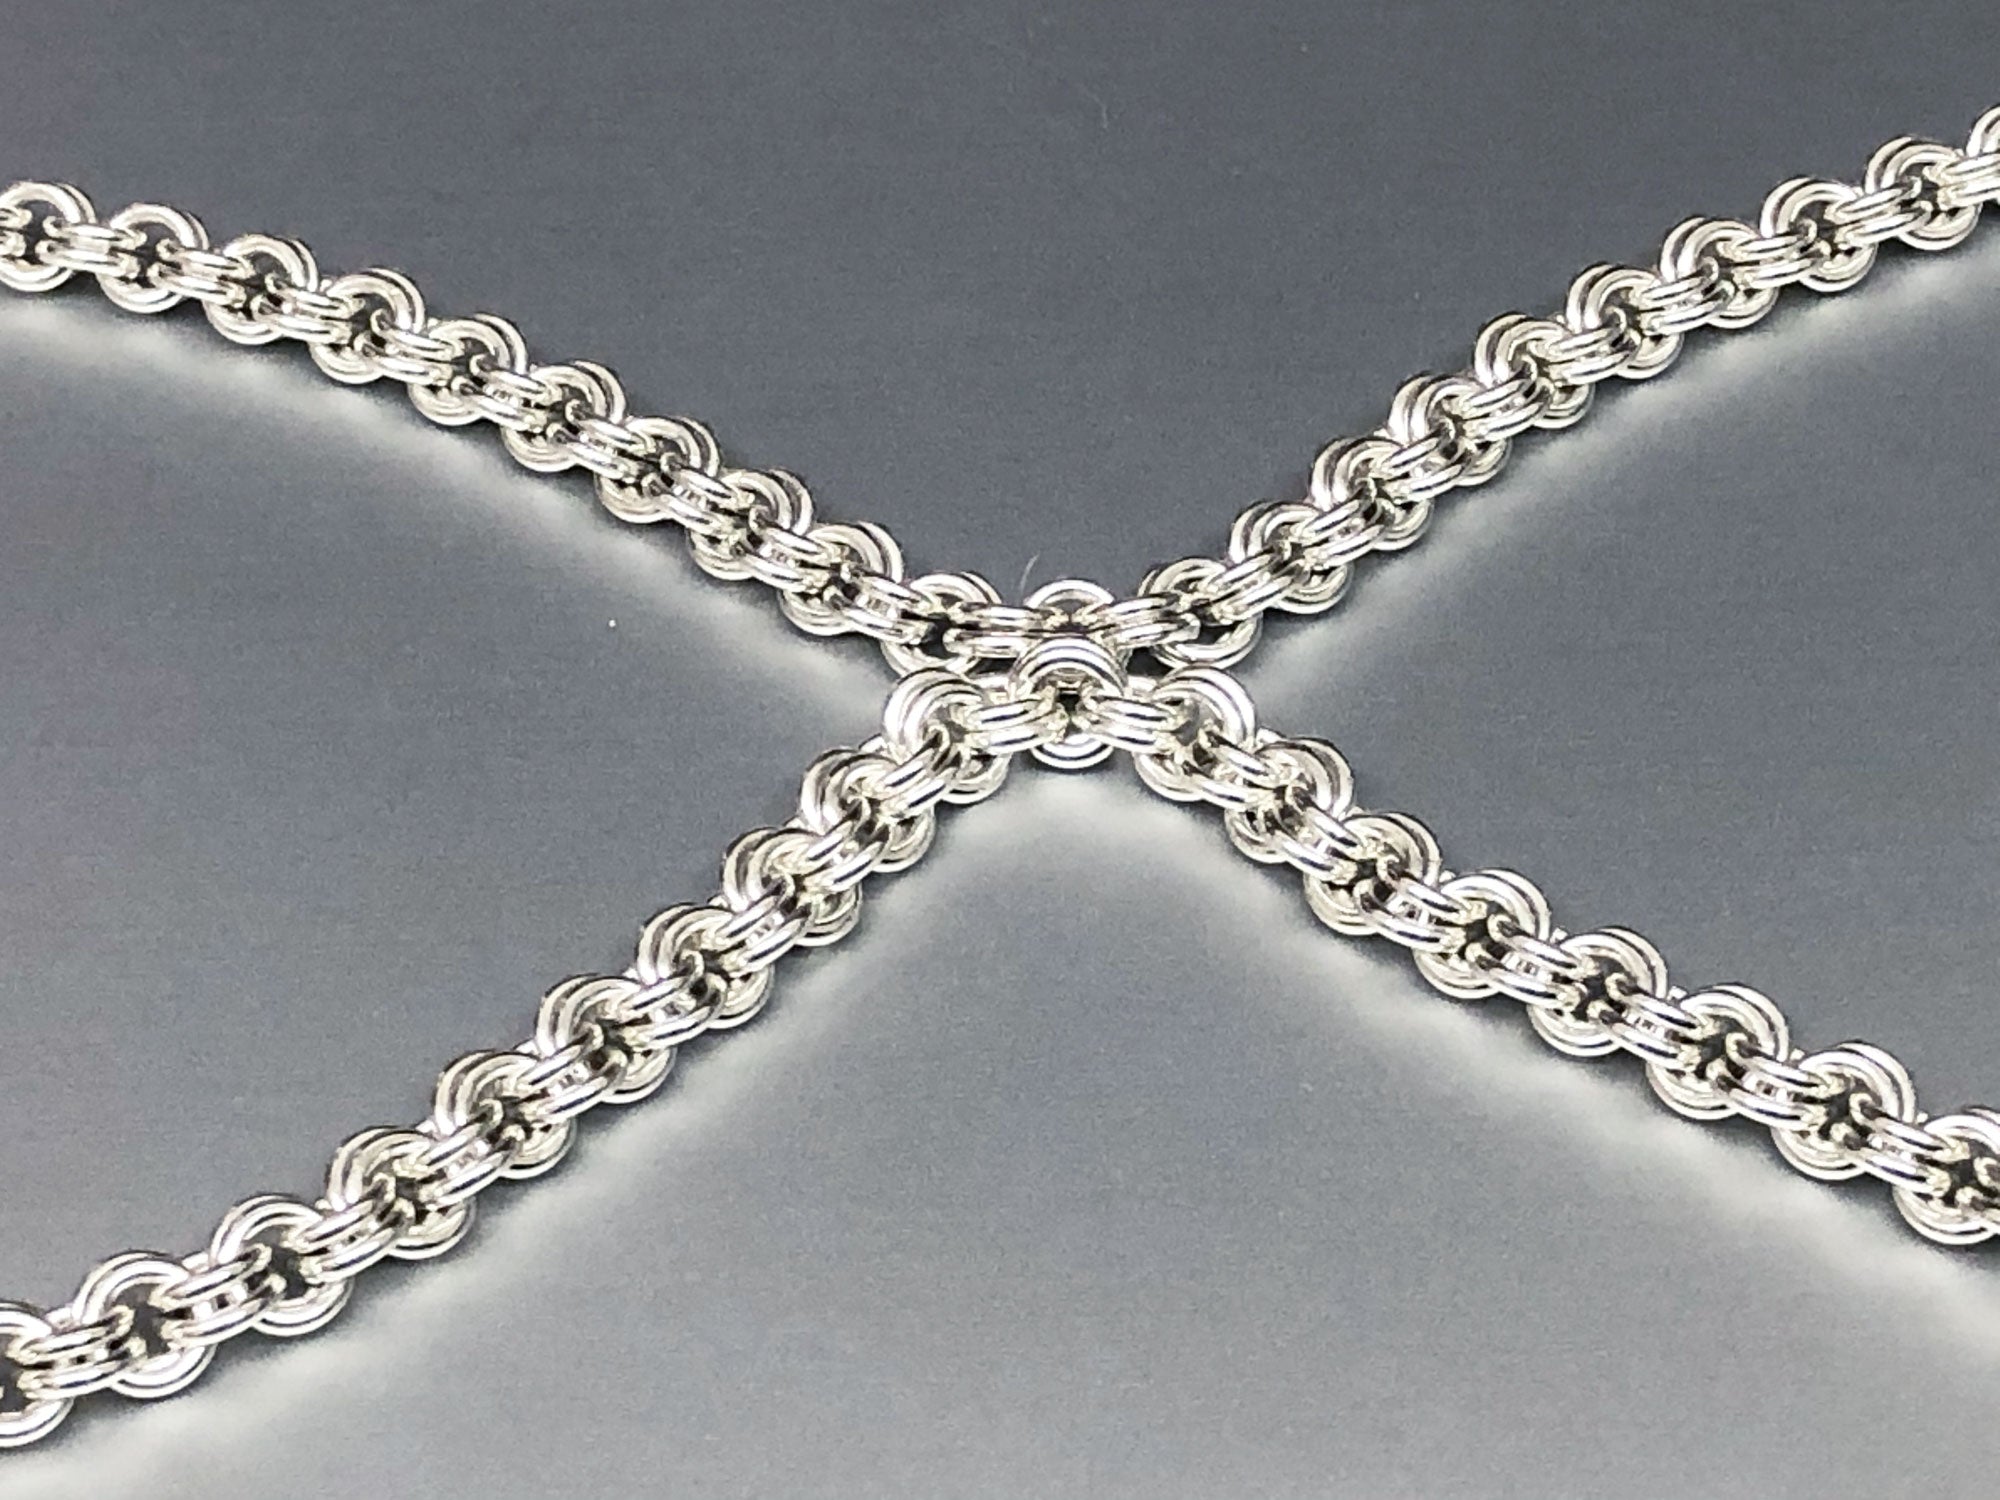 Seaxwolf Jewelry Designs  Sterling Silver Robust Double Link Chain Bracelet